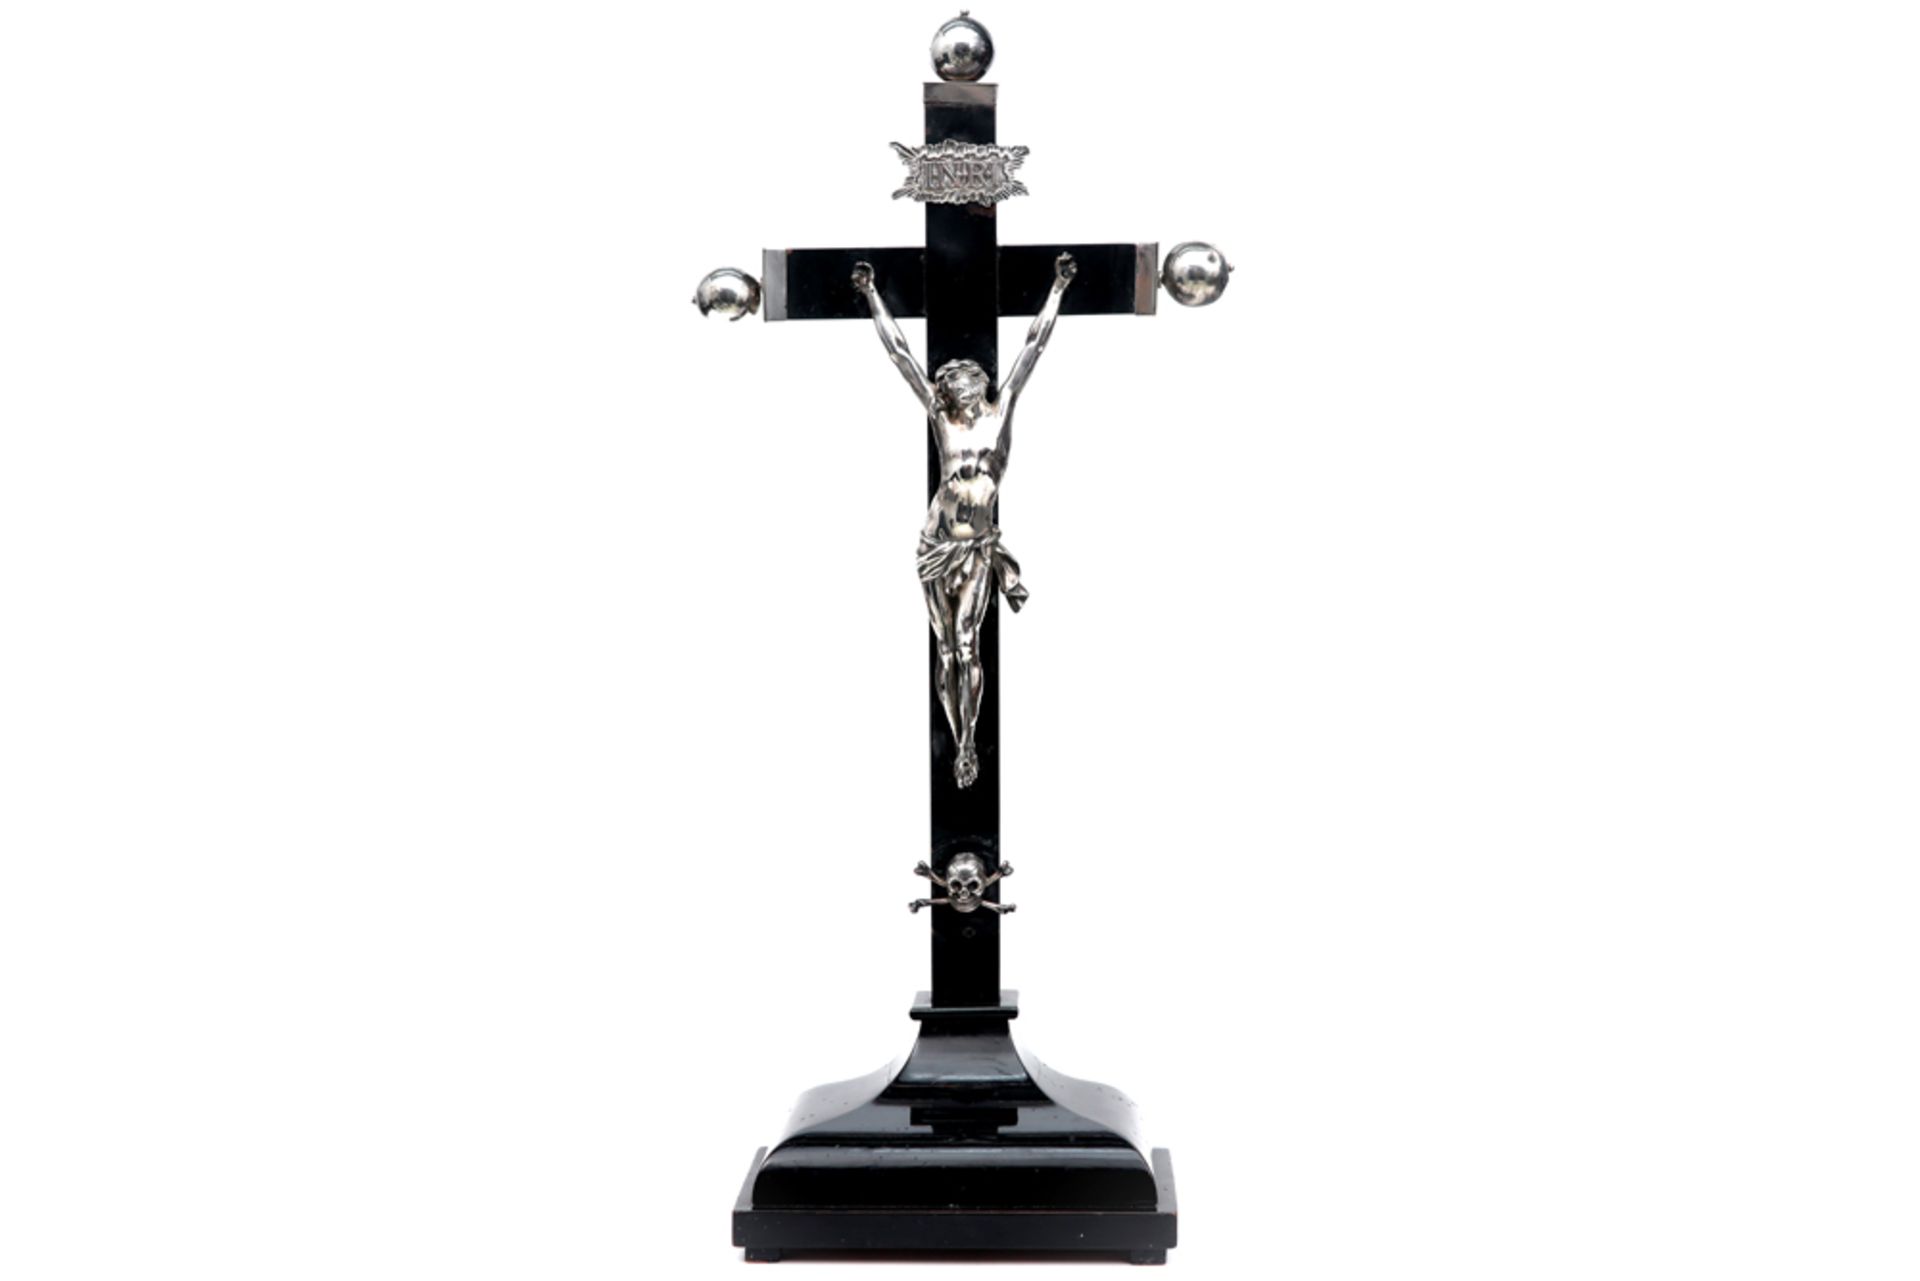 18th Cent., probably French crucifix with corpus, skull and ornamentation in twice marked silver (